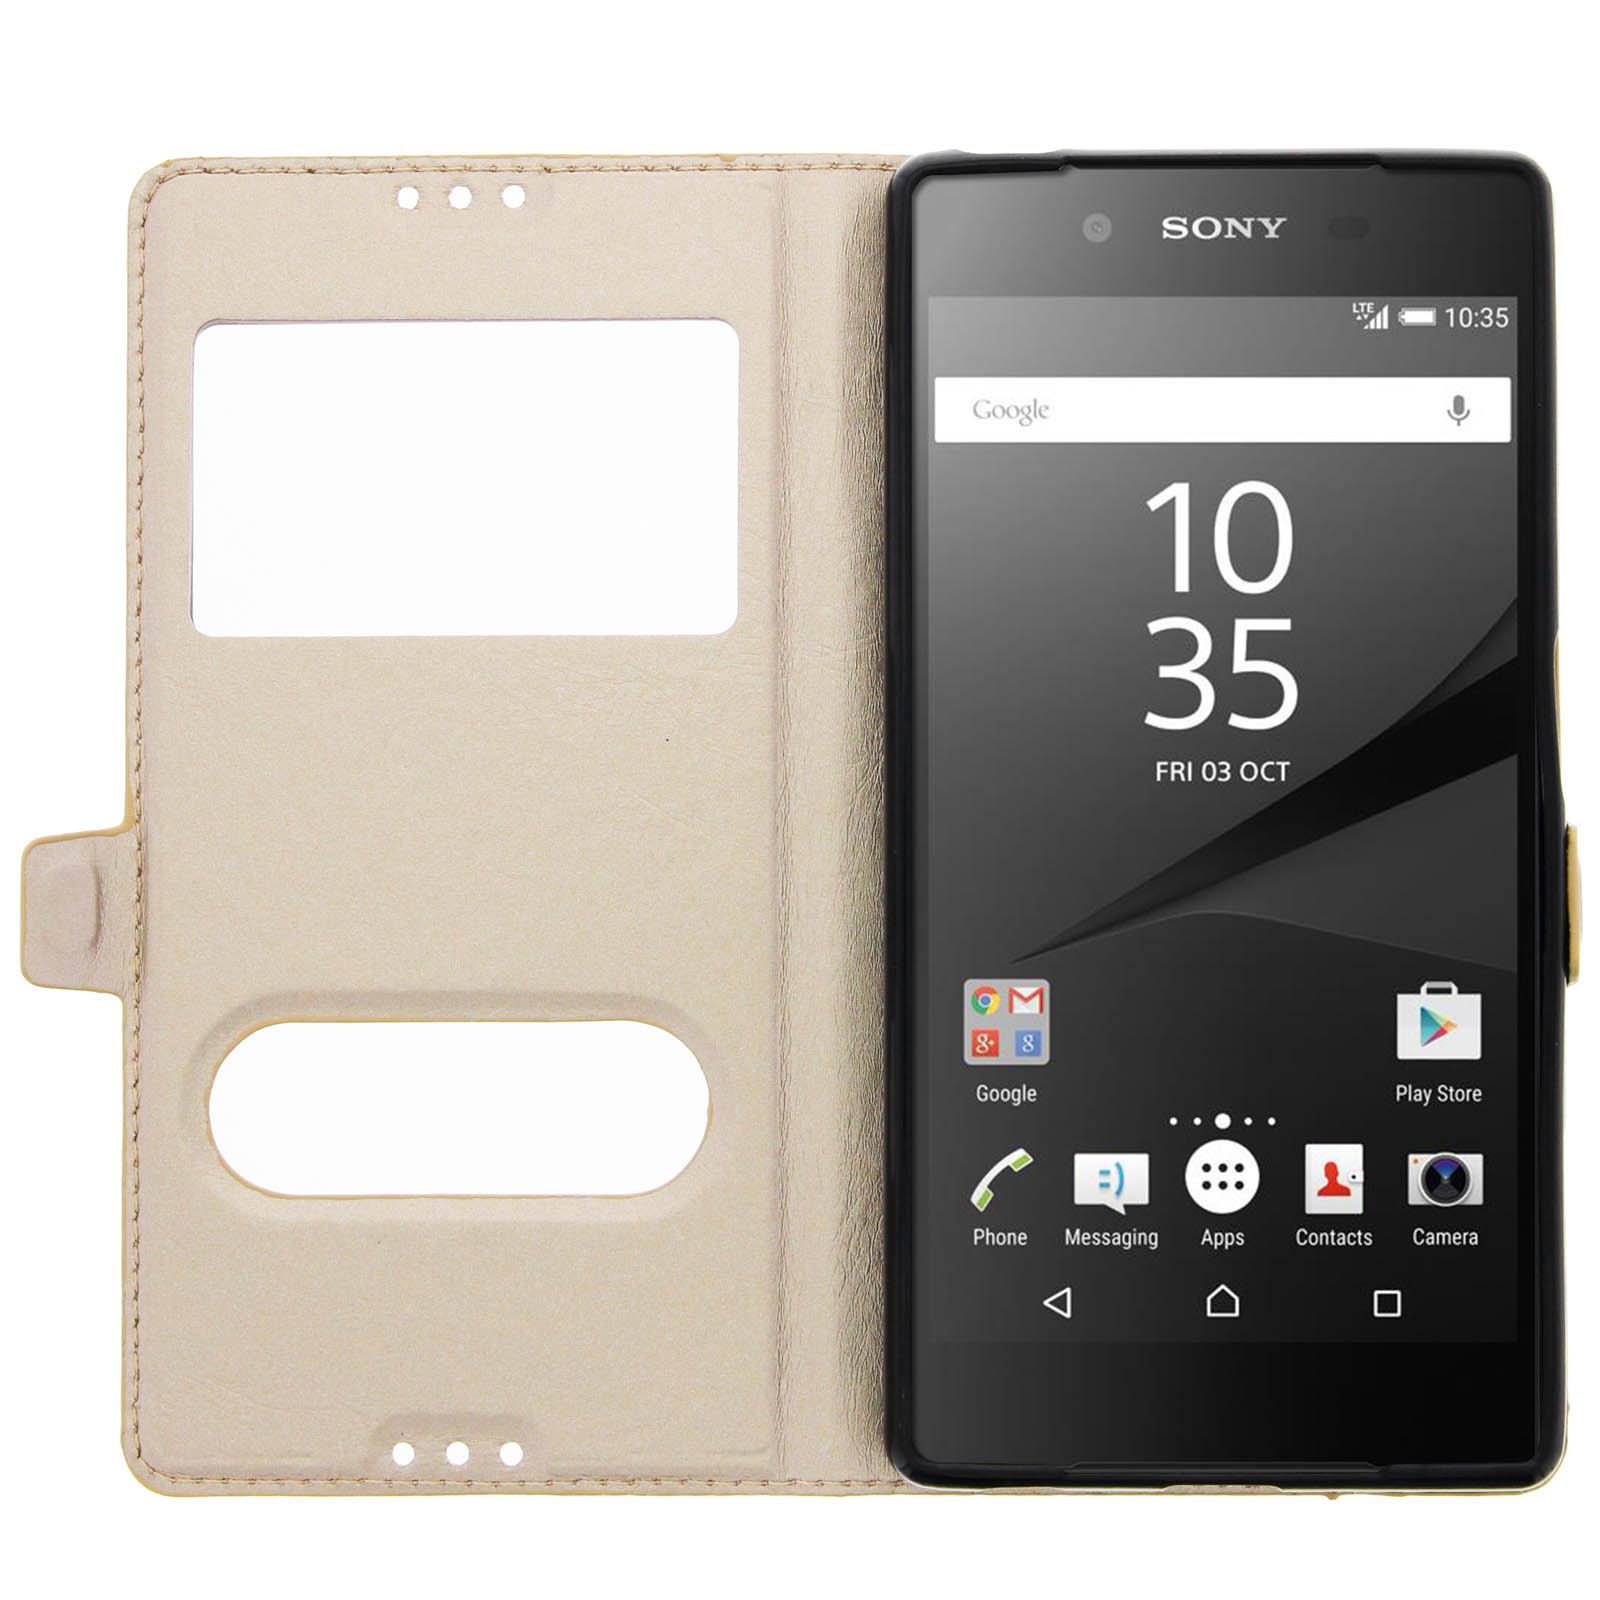 Xperia Gold AVIZAR Sony, Towind Z5, Series, Bookcover,